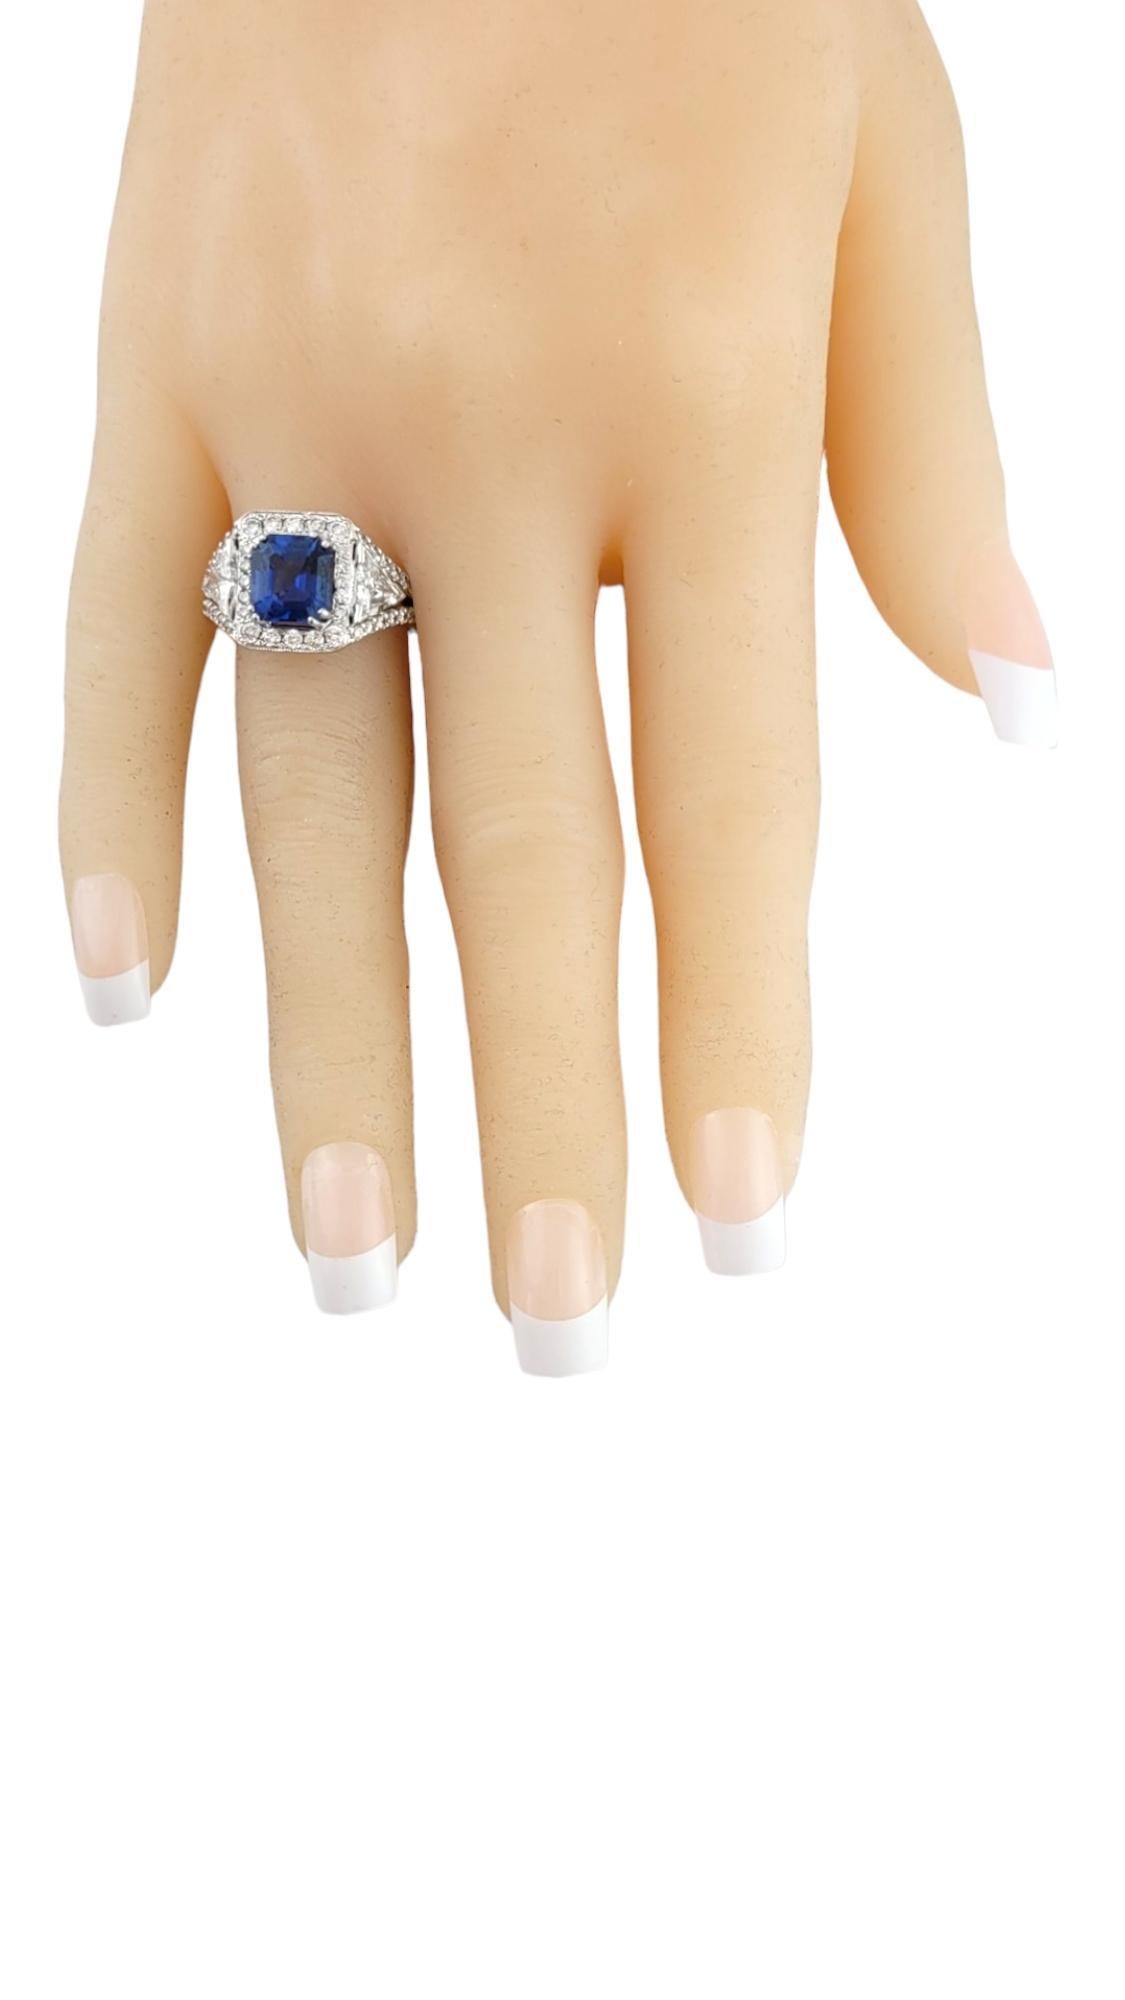 Women's 14K White Gold Diamond and Sapphire Engagement Ring Size 8.25 #16122 For Sale